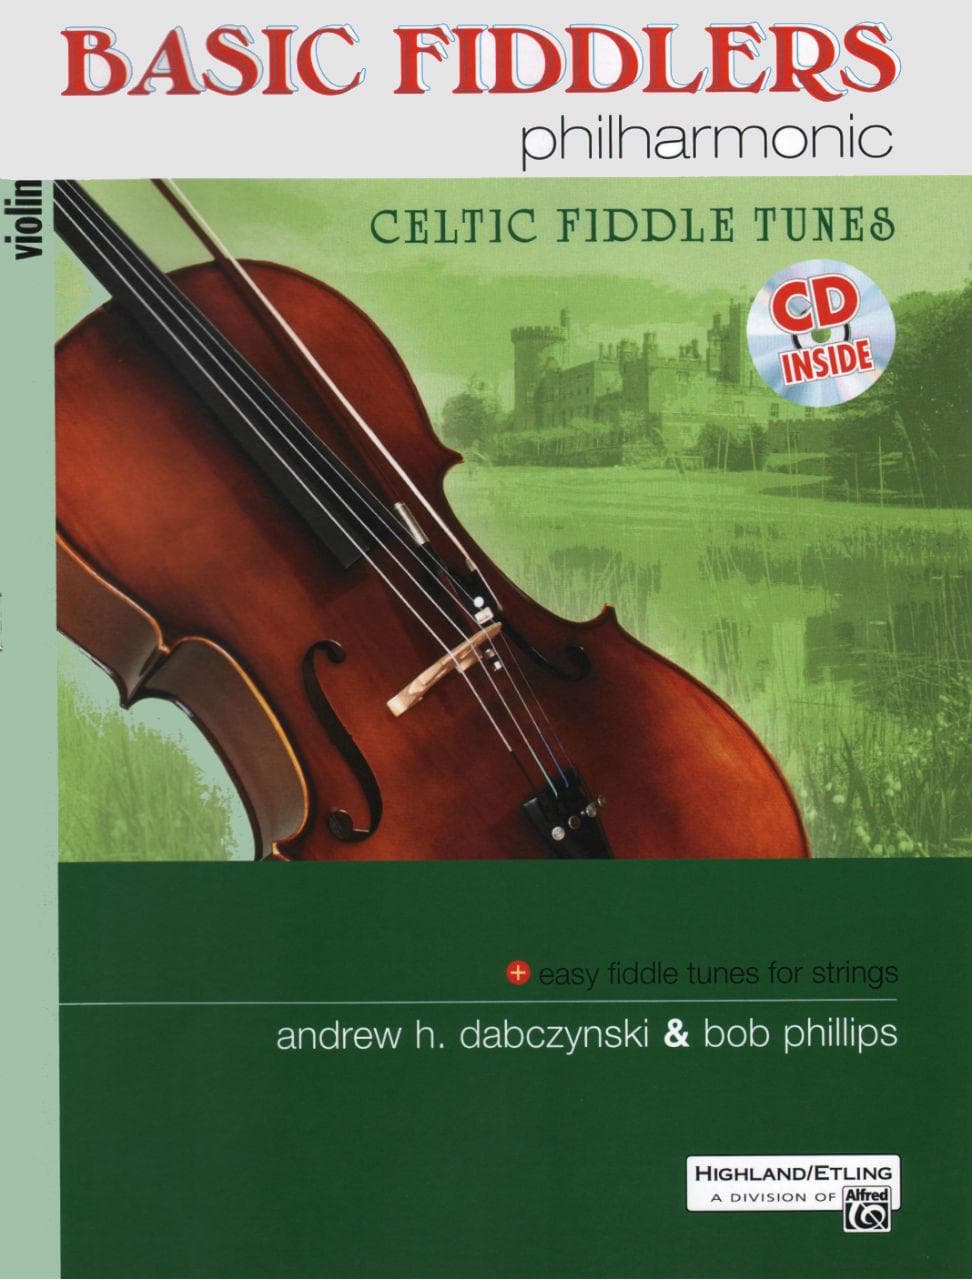 Basic Fiddlers Philharmonic - Celtic Fiddle Tunes - Violin Book with CD - by Dabczynski & Phillips - Alfred Publishing